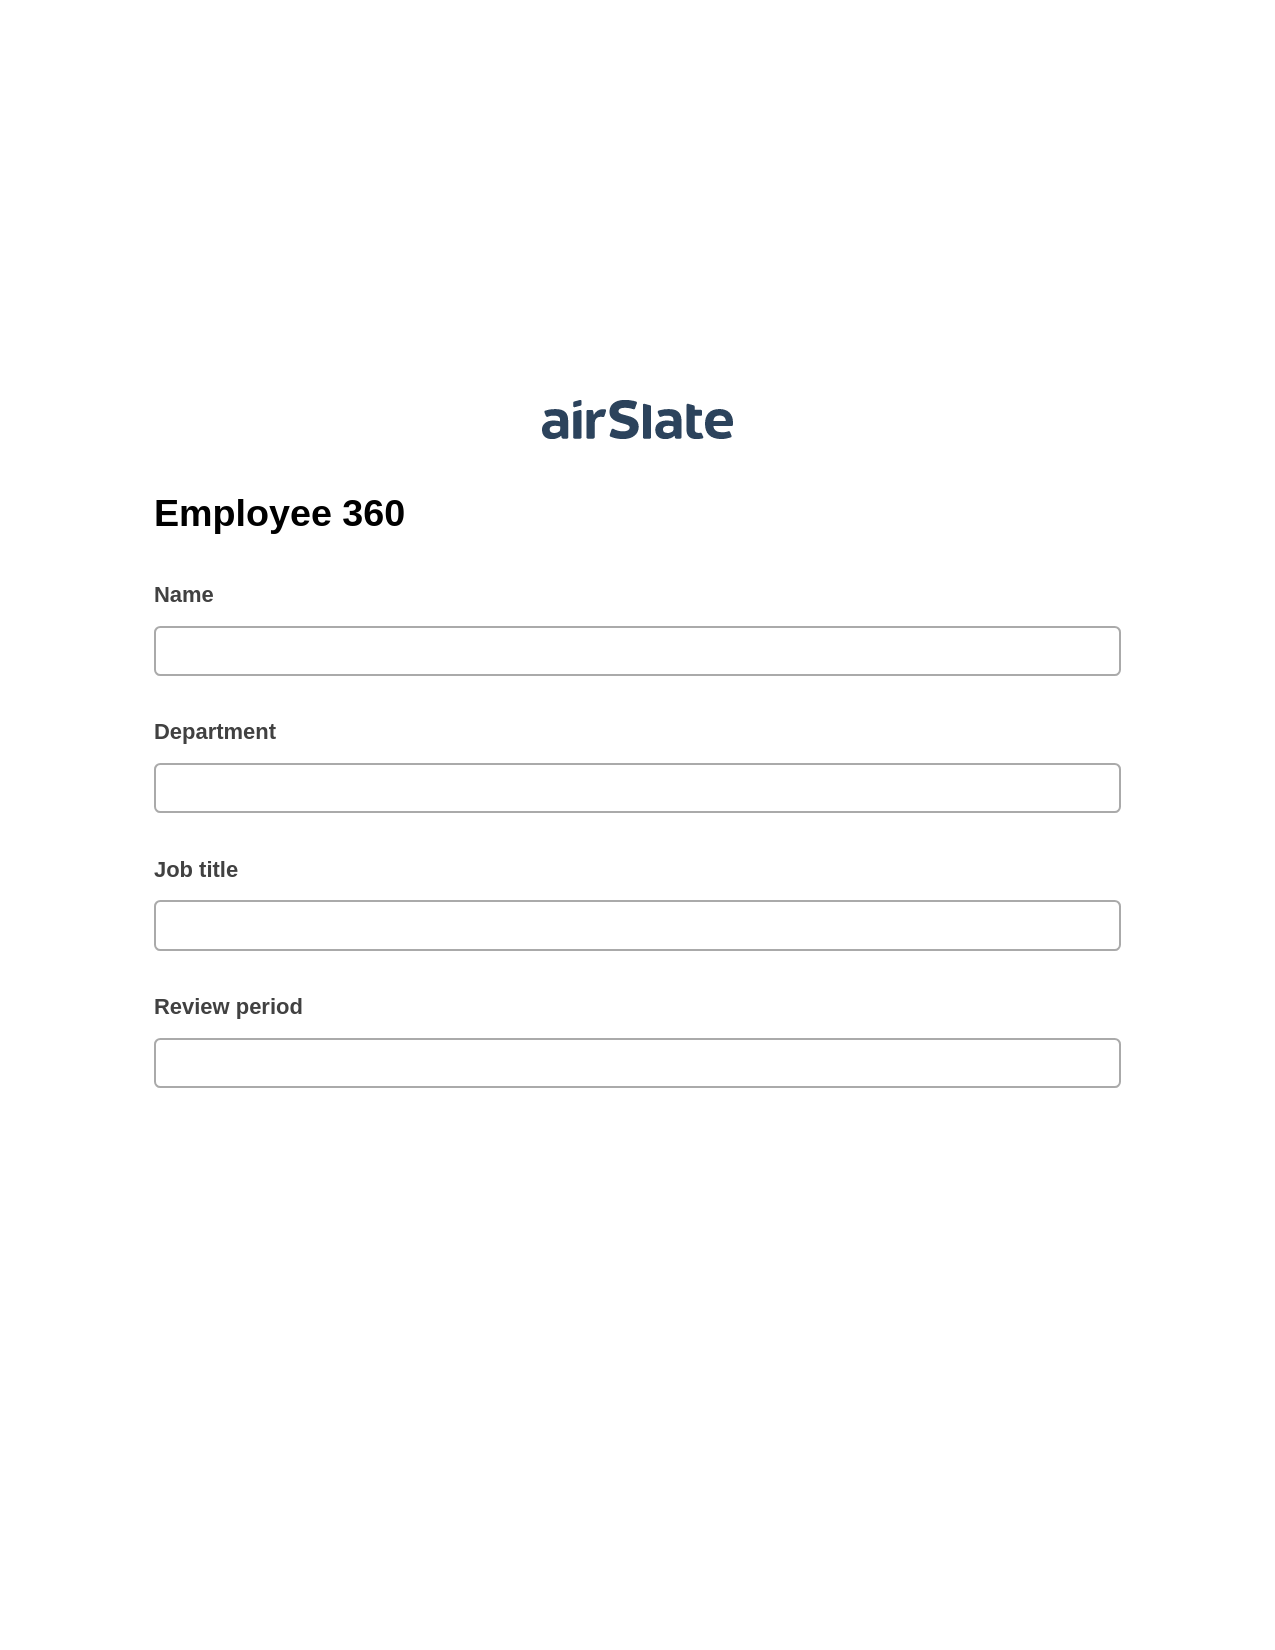 Employee 360 Pre-fill from MS Dynamics 365 Records, SendGrid send Campaign bot, Export to MySQL Bot